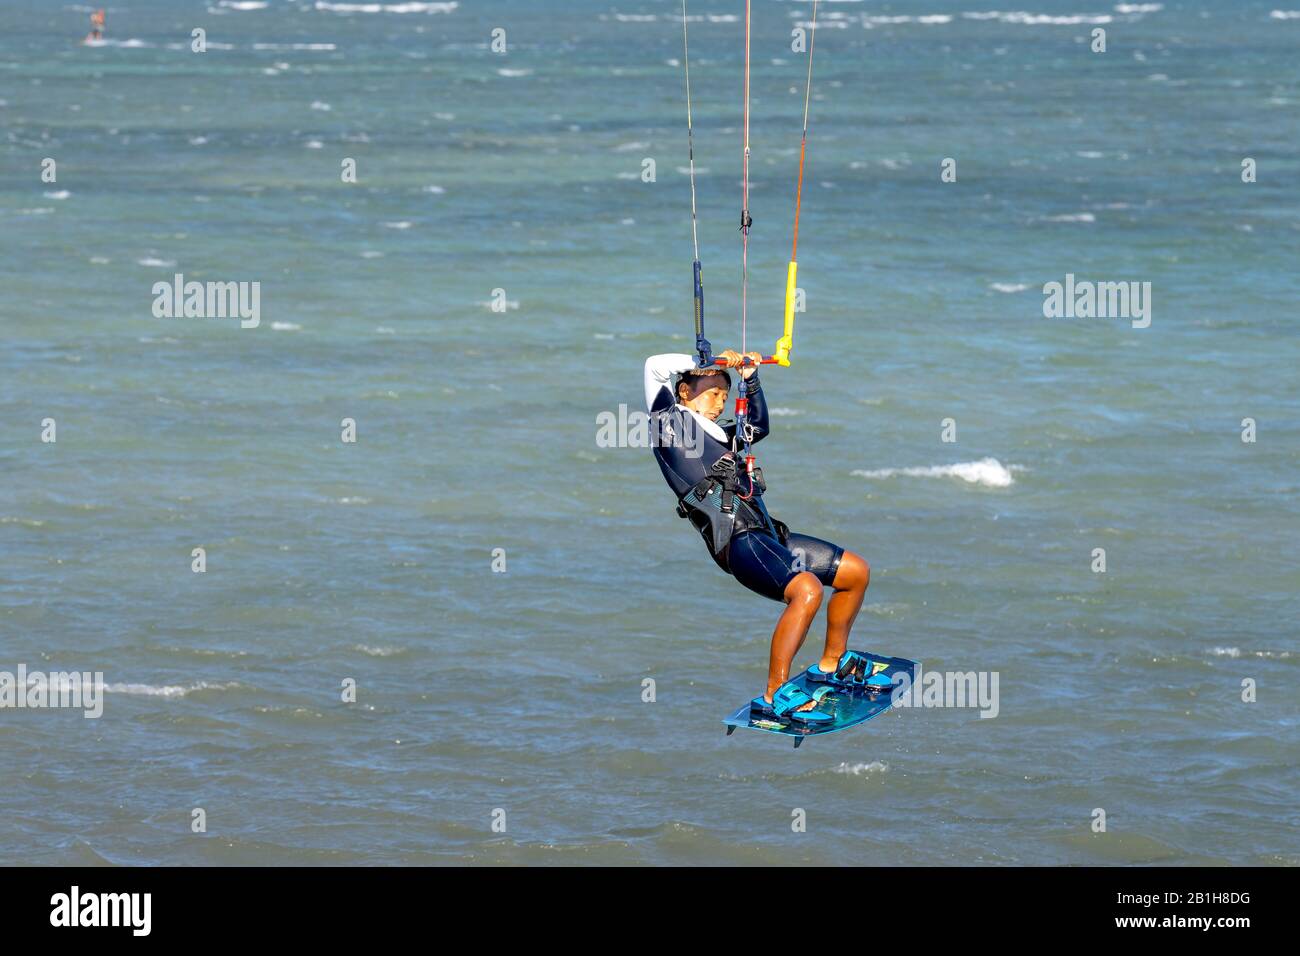 Ninh Chu Beach, Ninh Thuan Province, Vietnam - January 9, 2020: Kite surfing scene on the beach in Ninh Chu. Kite surfing is a sport that is loved by Stock Photo